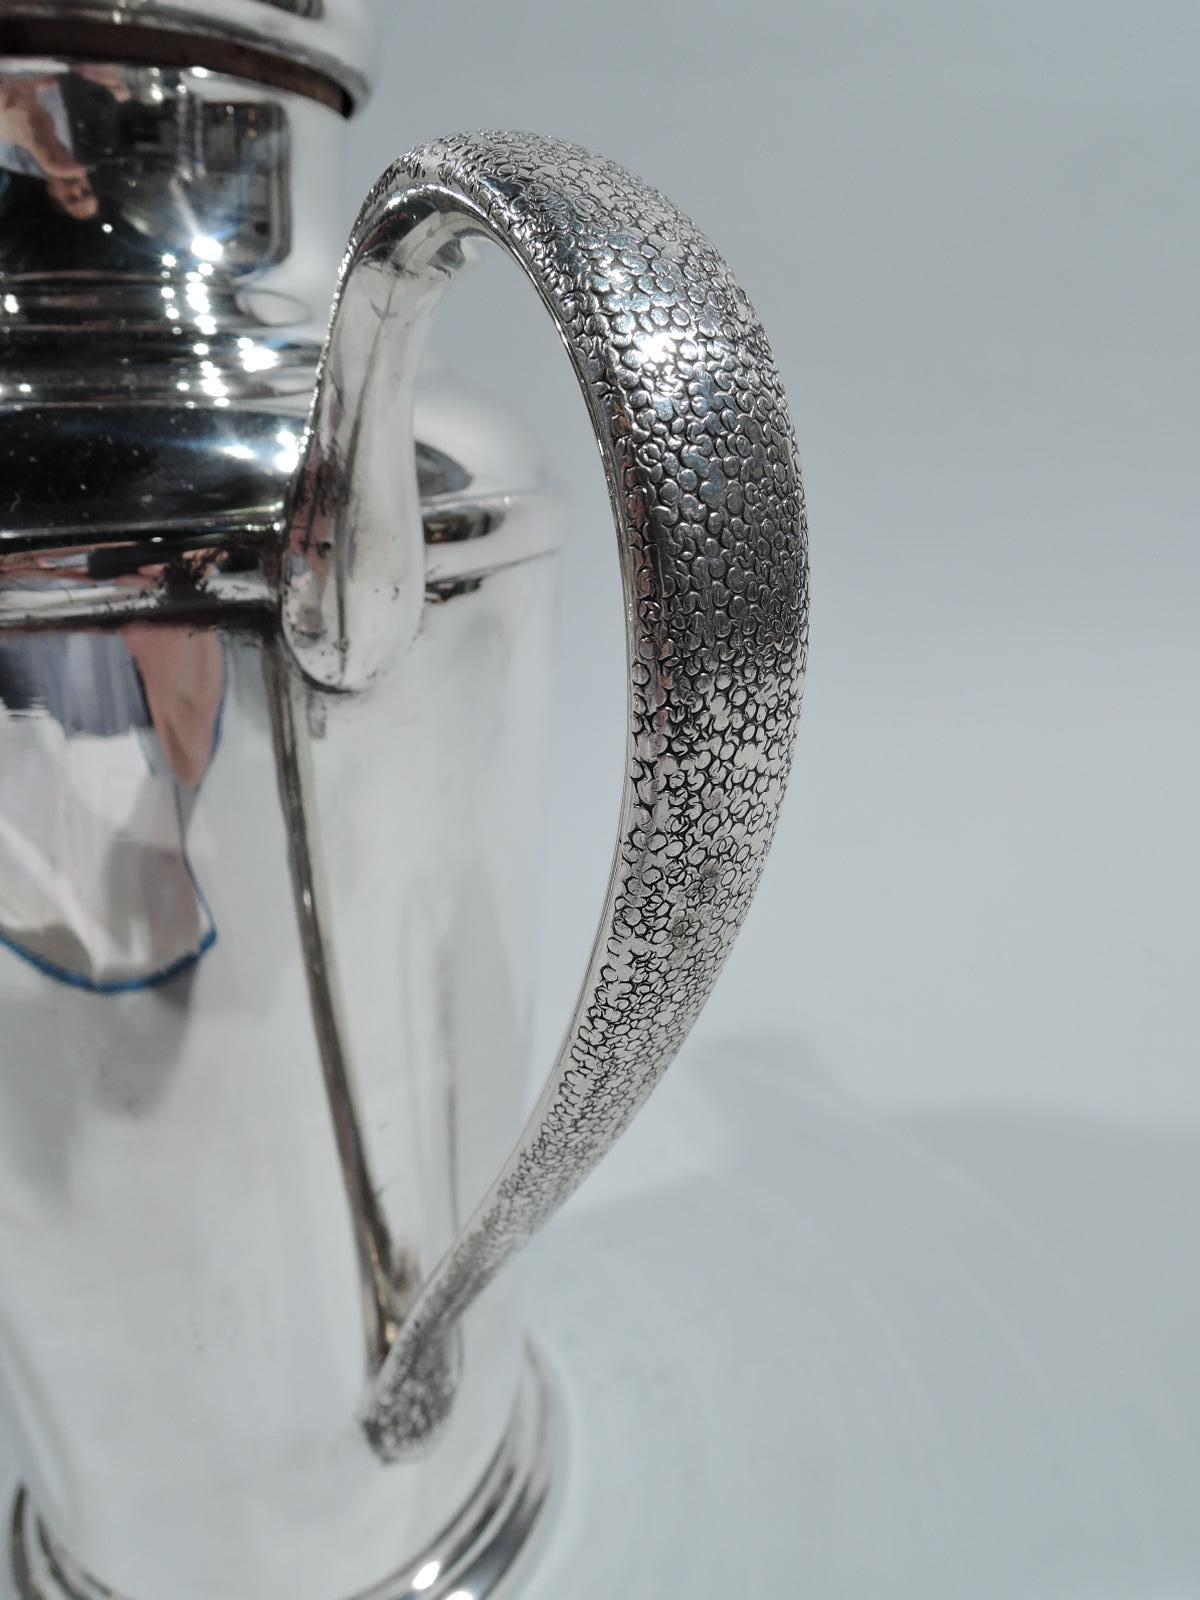 20th Century South American Mid-Century Modern Sterling Silver Cocktail Shaker